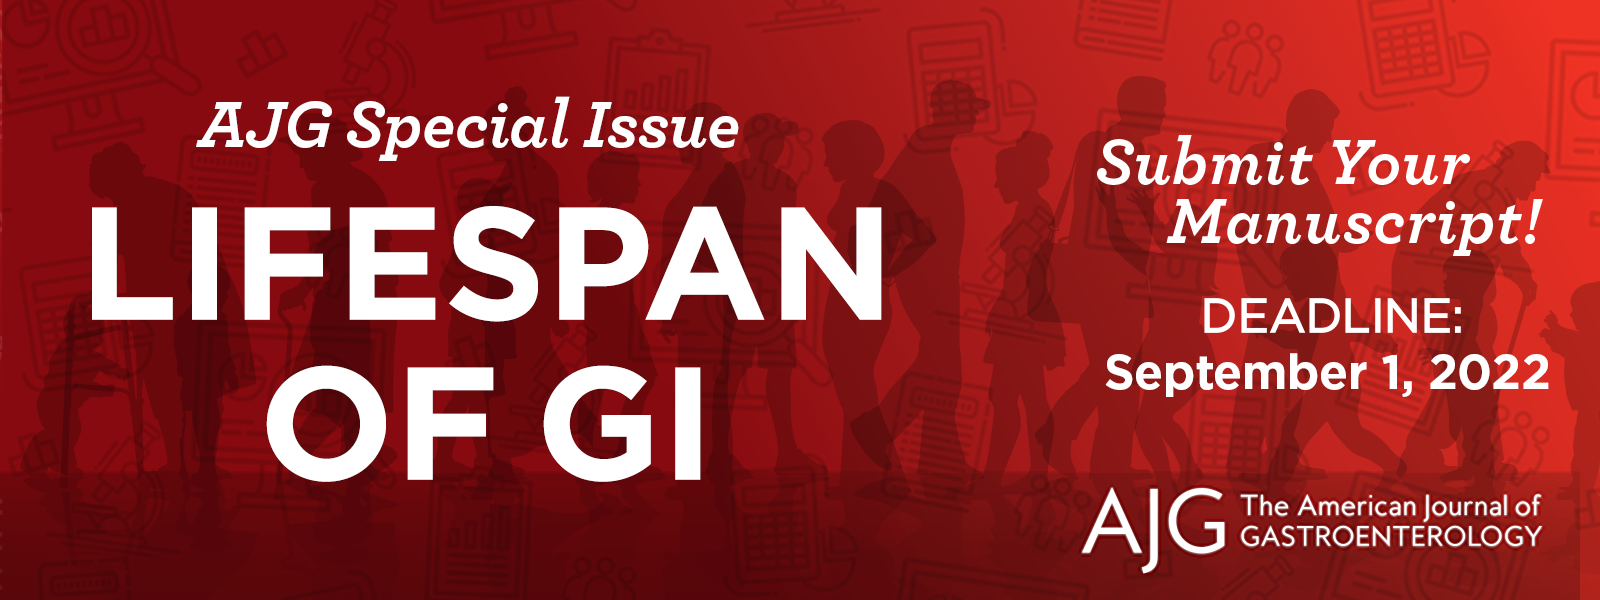 AJG Special Issue - Lifespan of GI